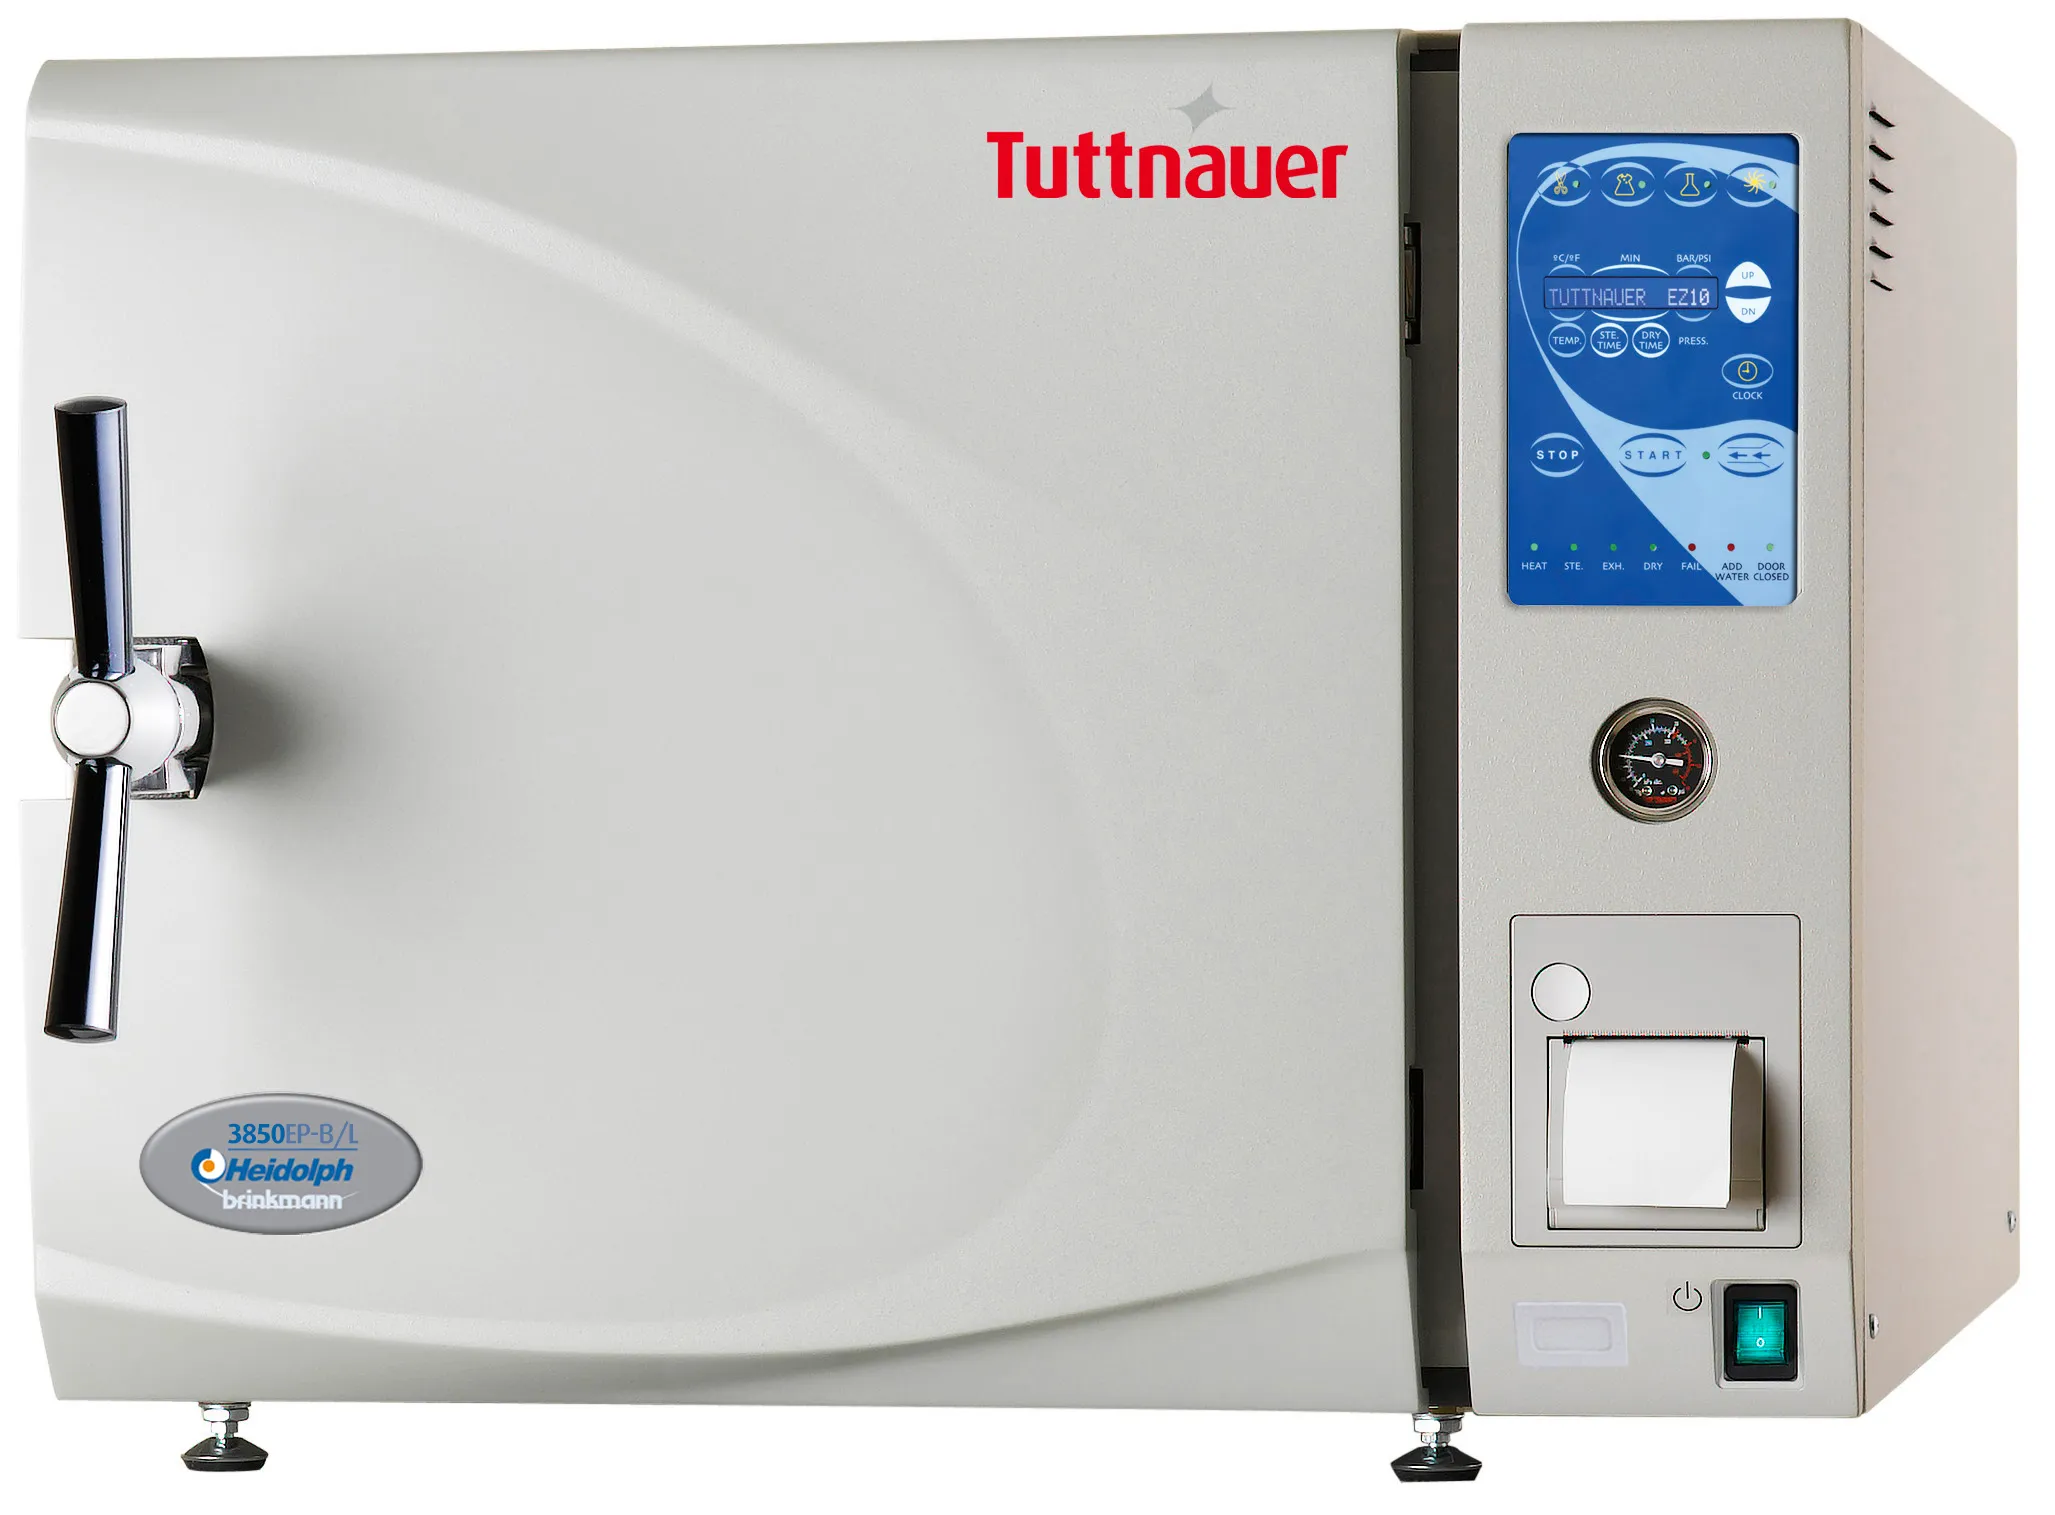 Heidolph Tuttnauer Electronic Autoclave 3850EP, 230V